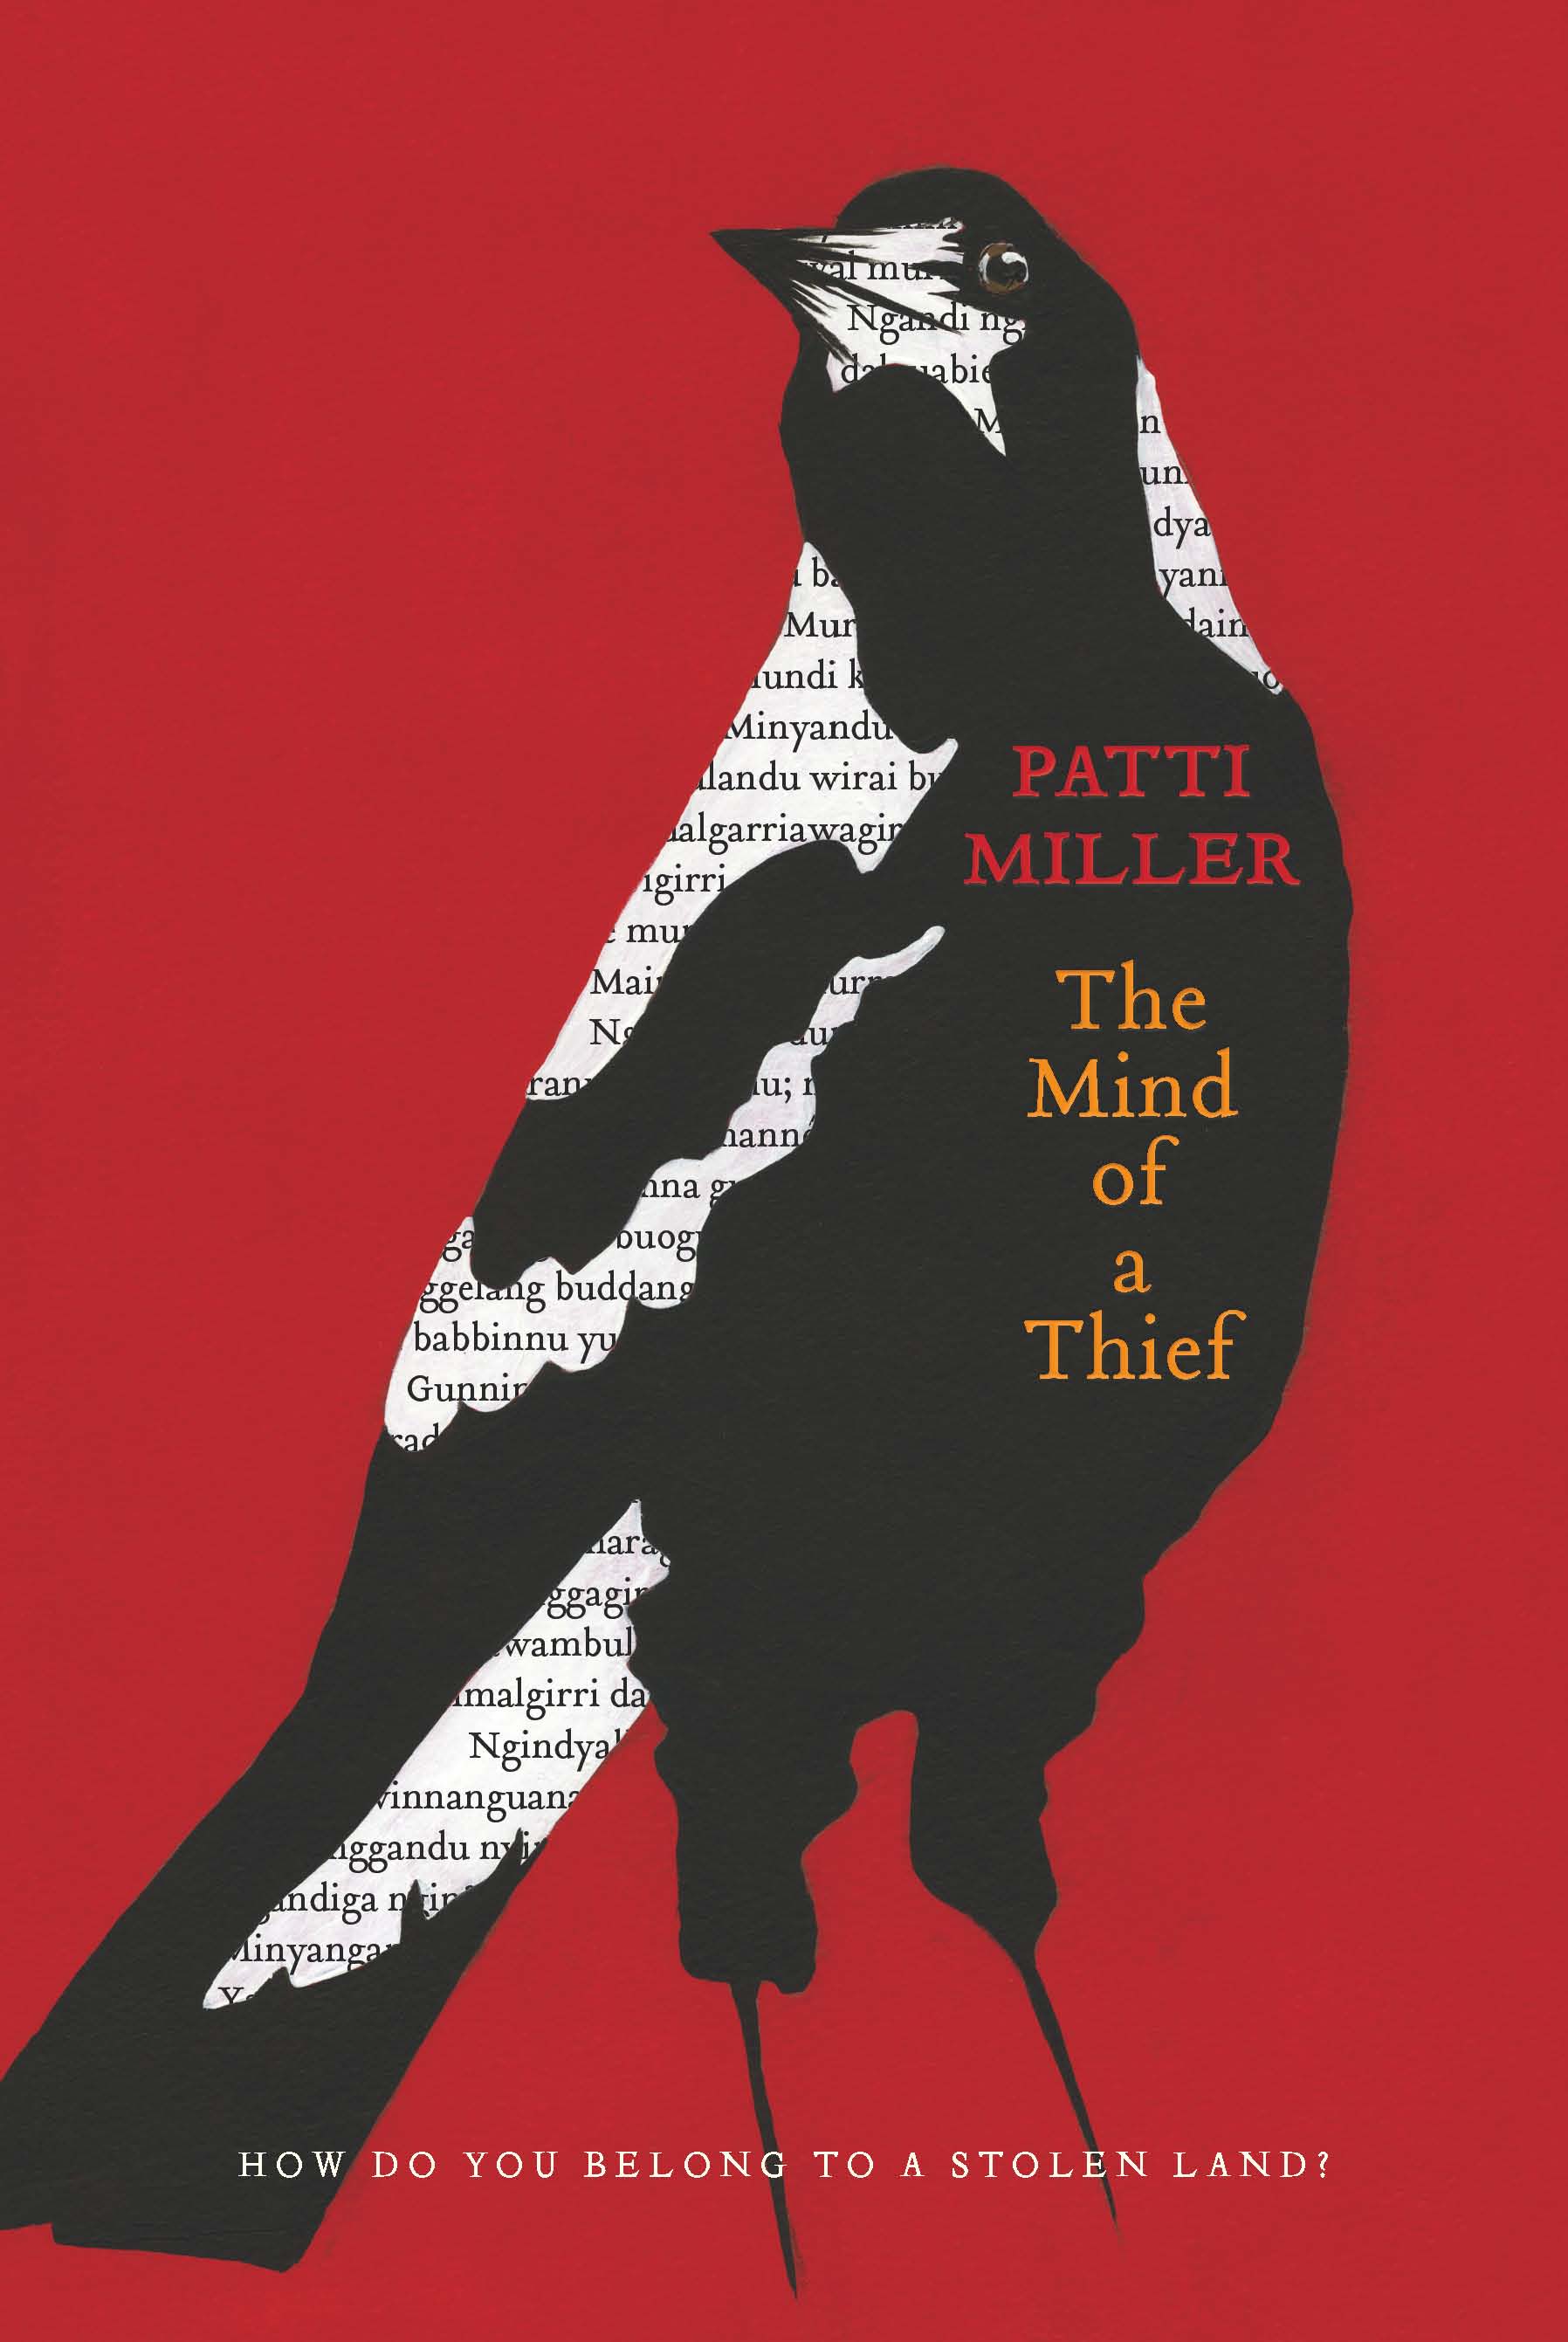 The Mind of a Thief (2012) by Patti Miller